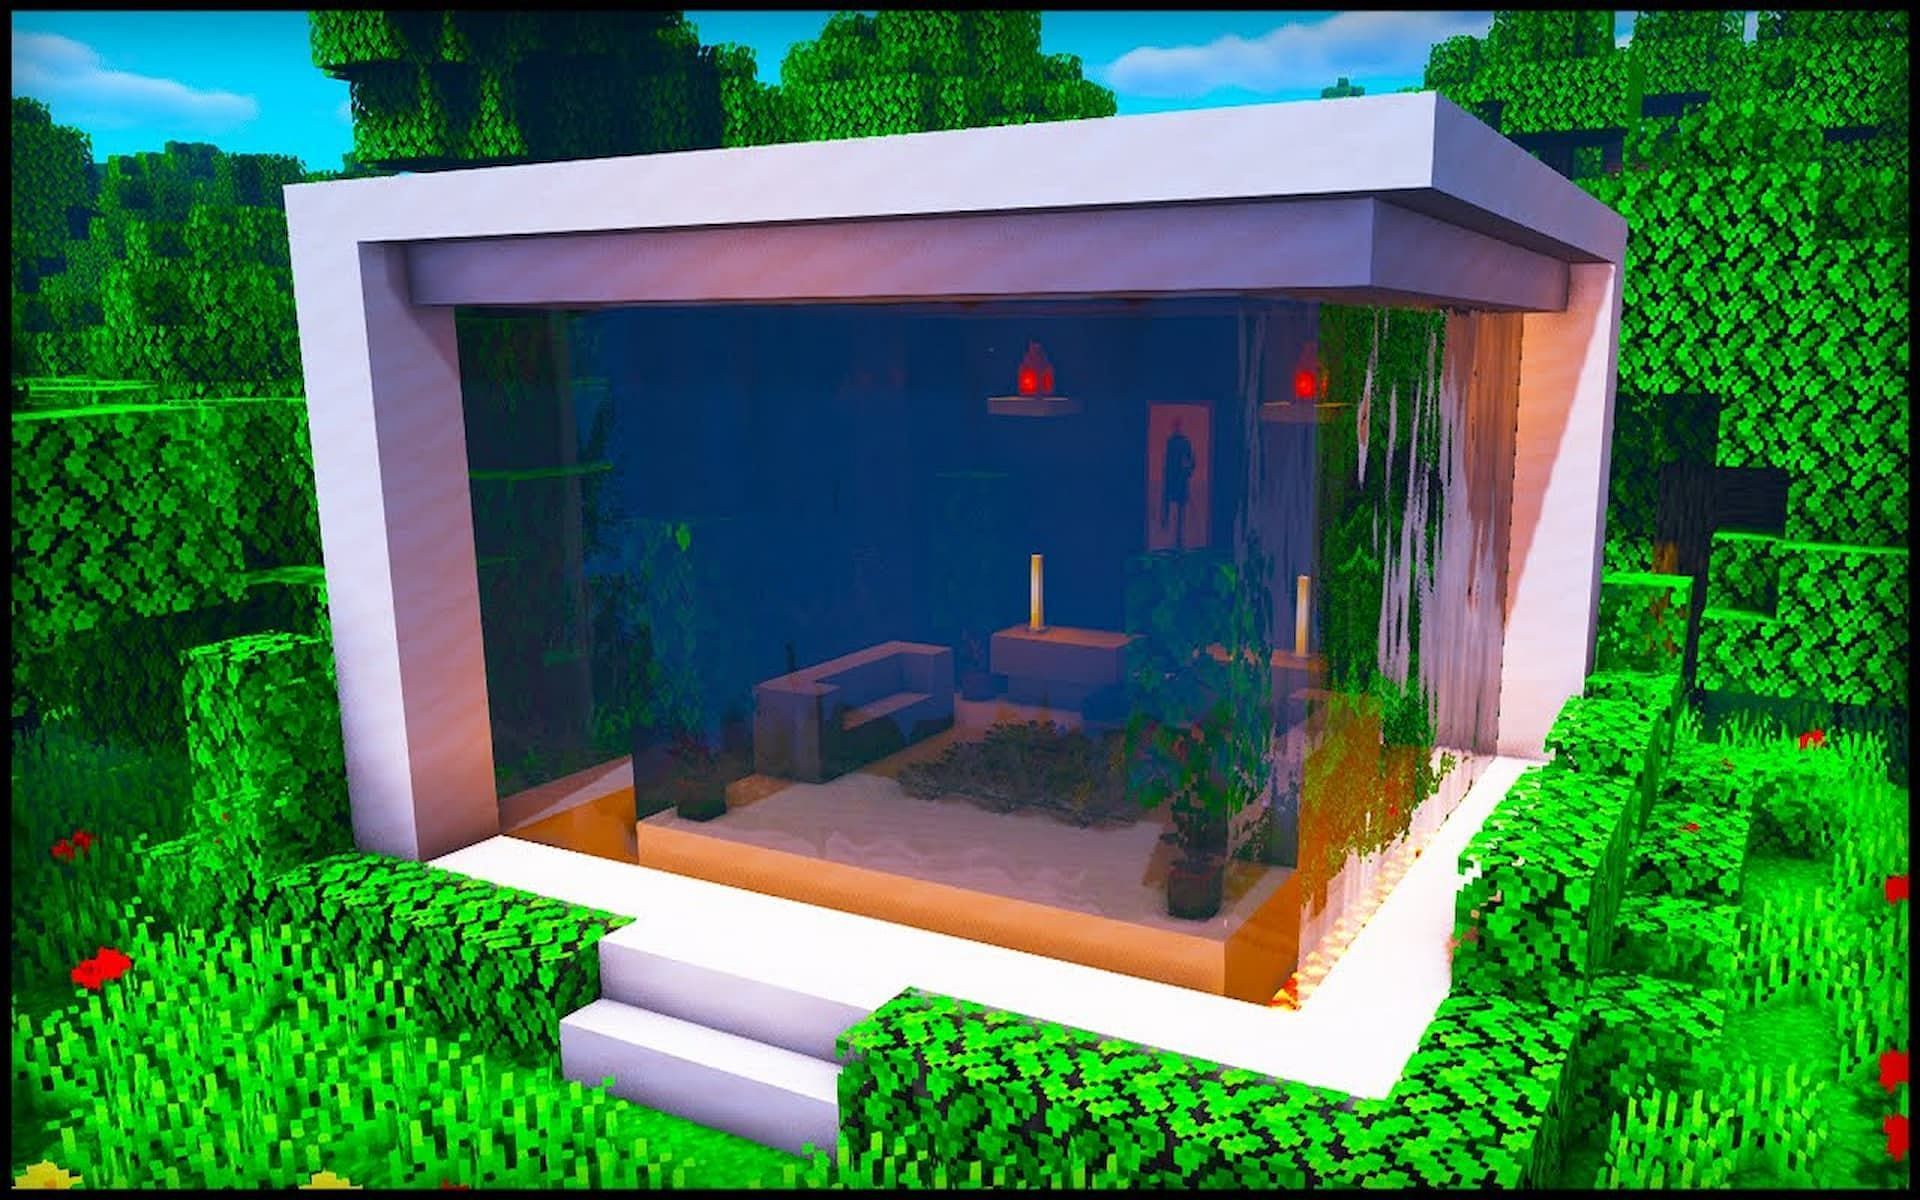 Players can have the coolest house on the block with these builds (Image via YouTube/Random Steve Guy)